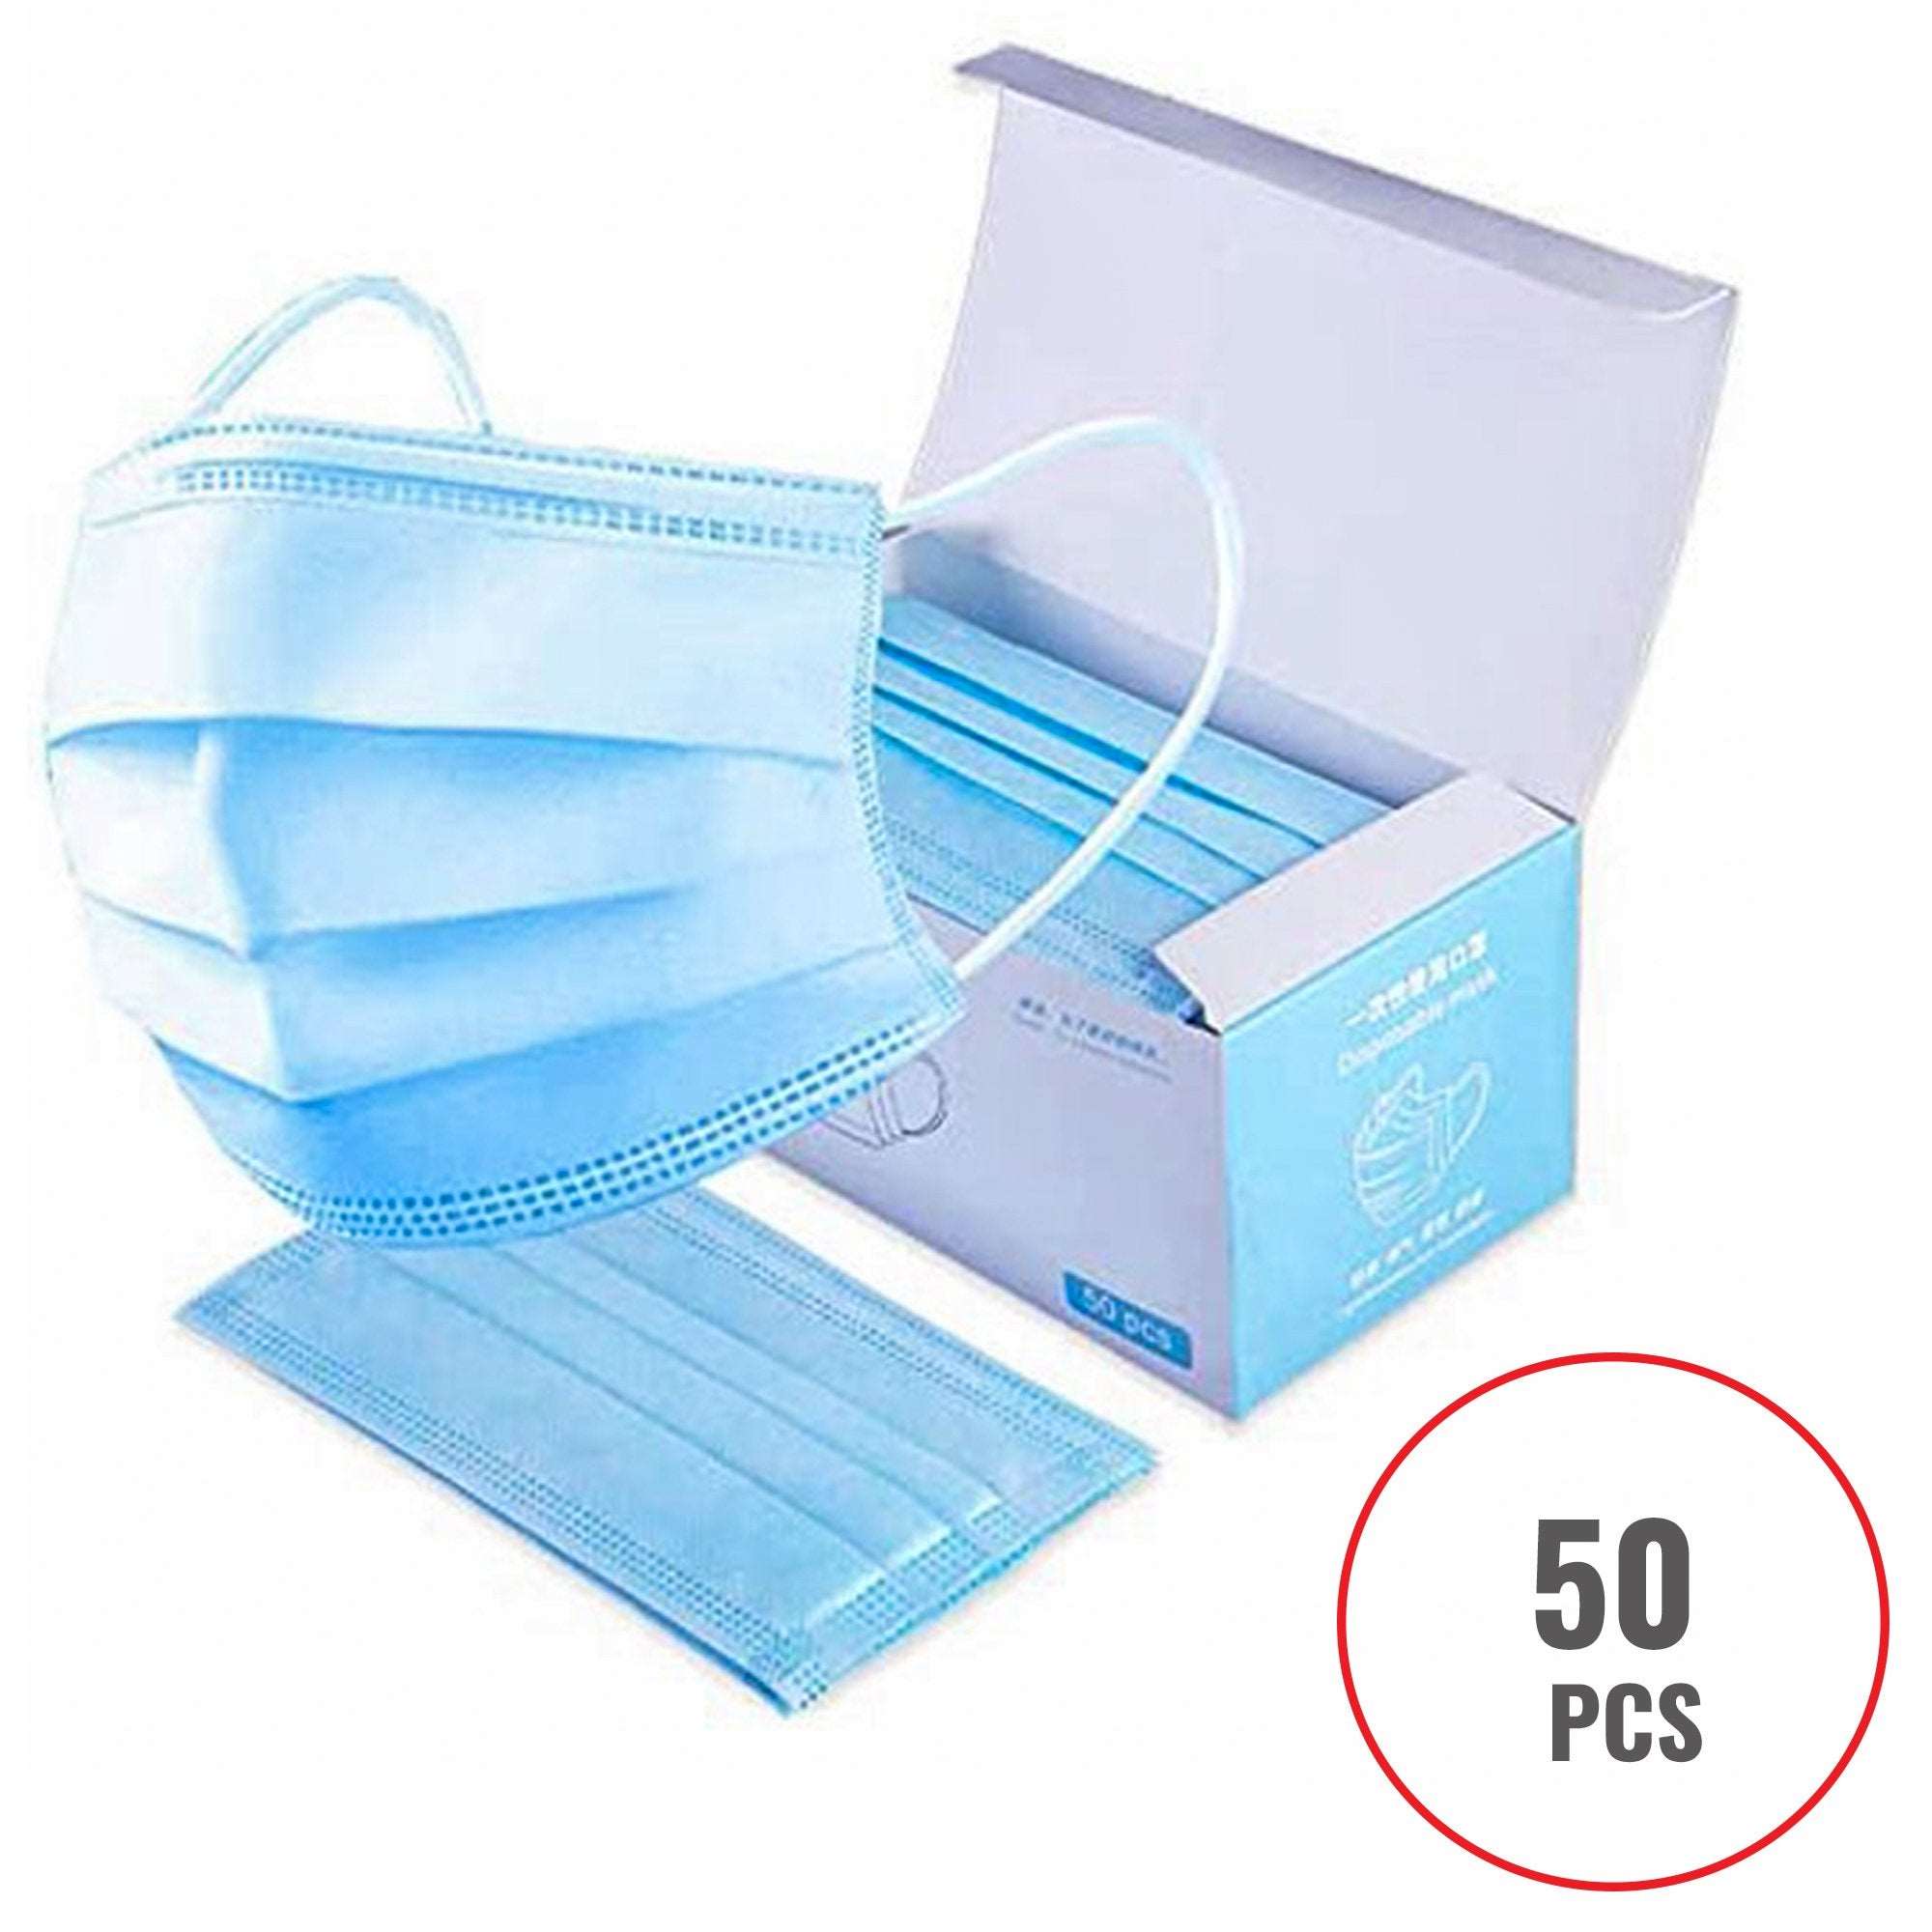 Box of 50 Disposable Surgical Face Mask